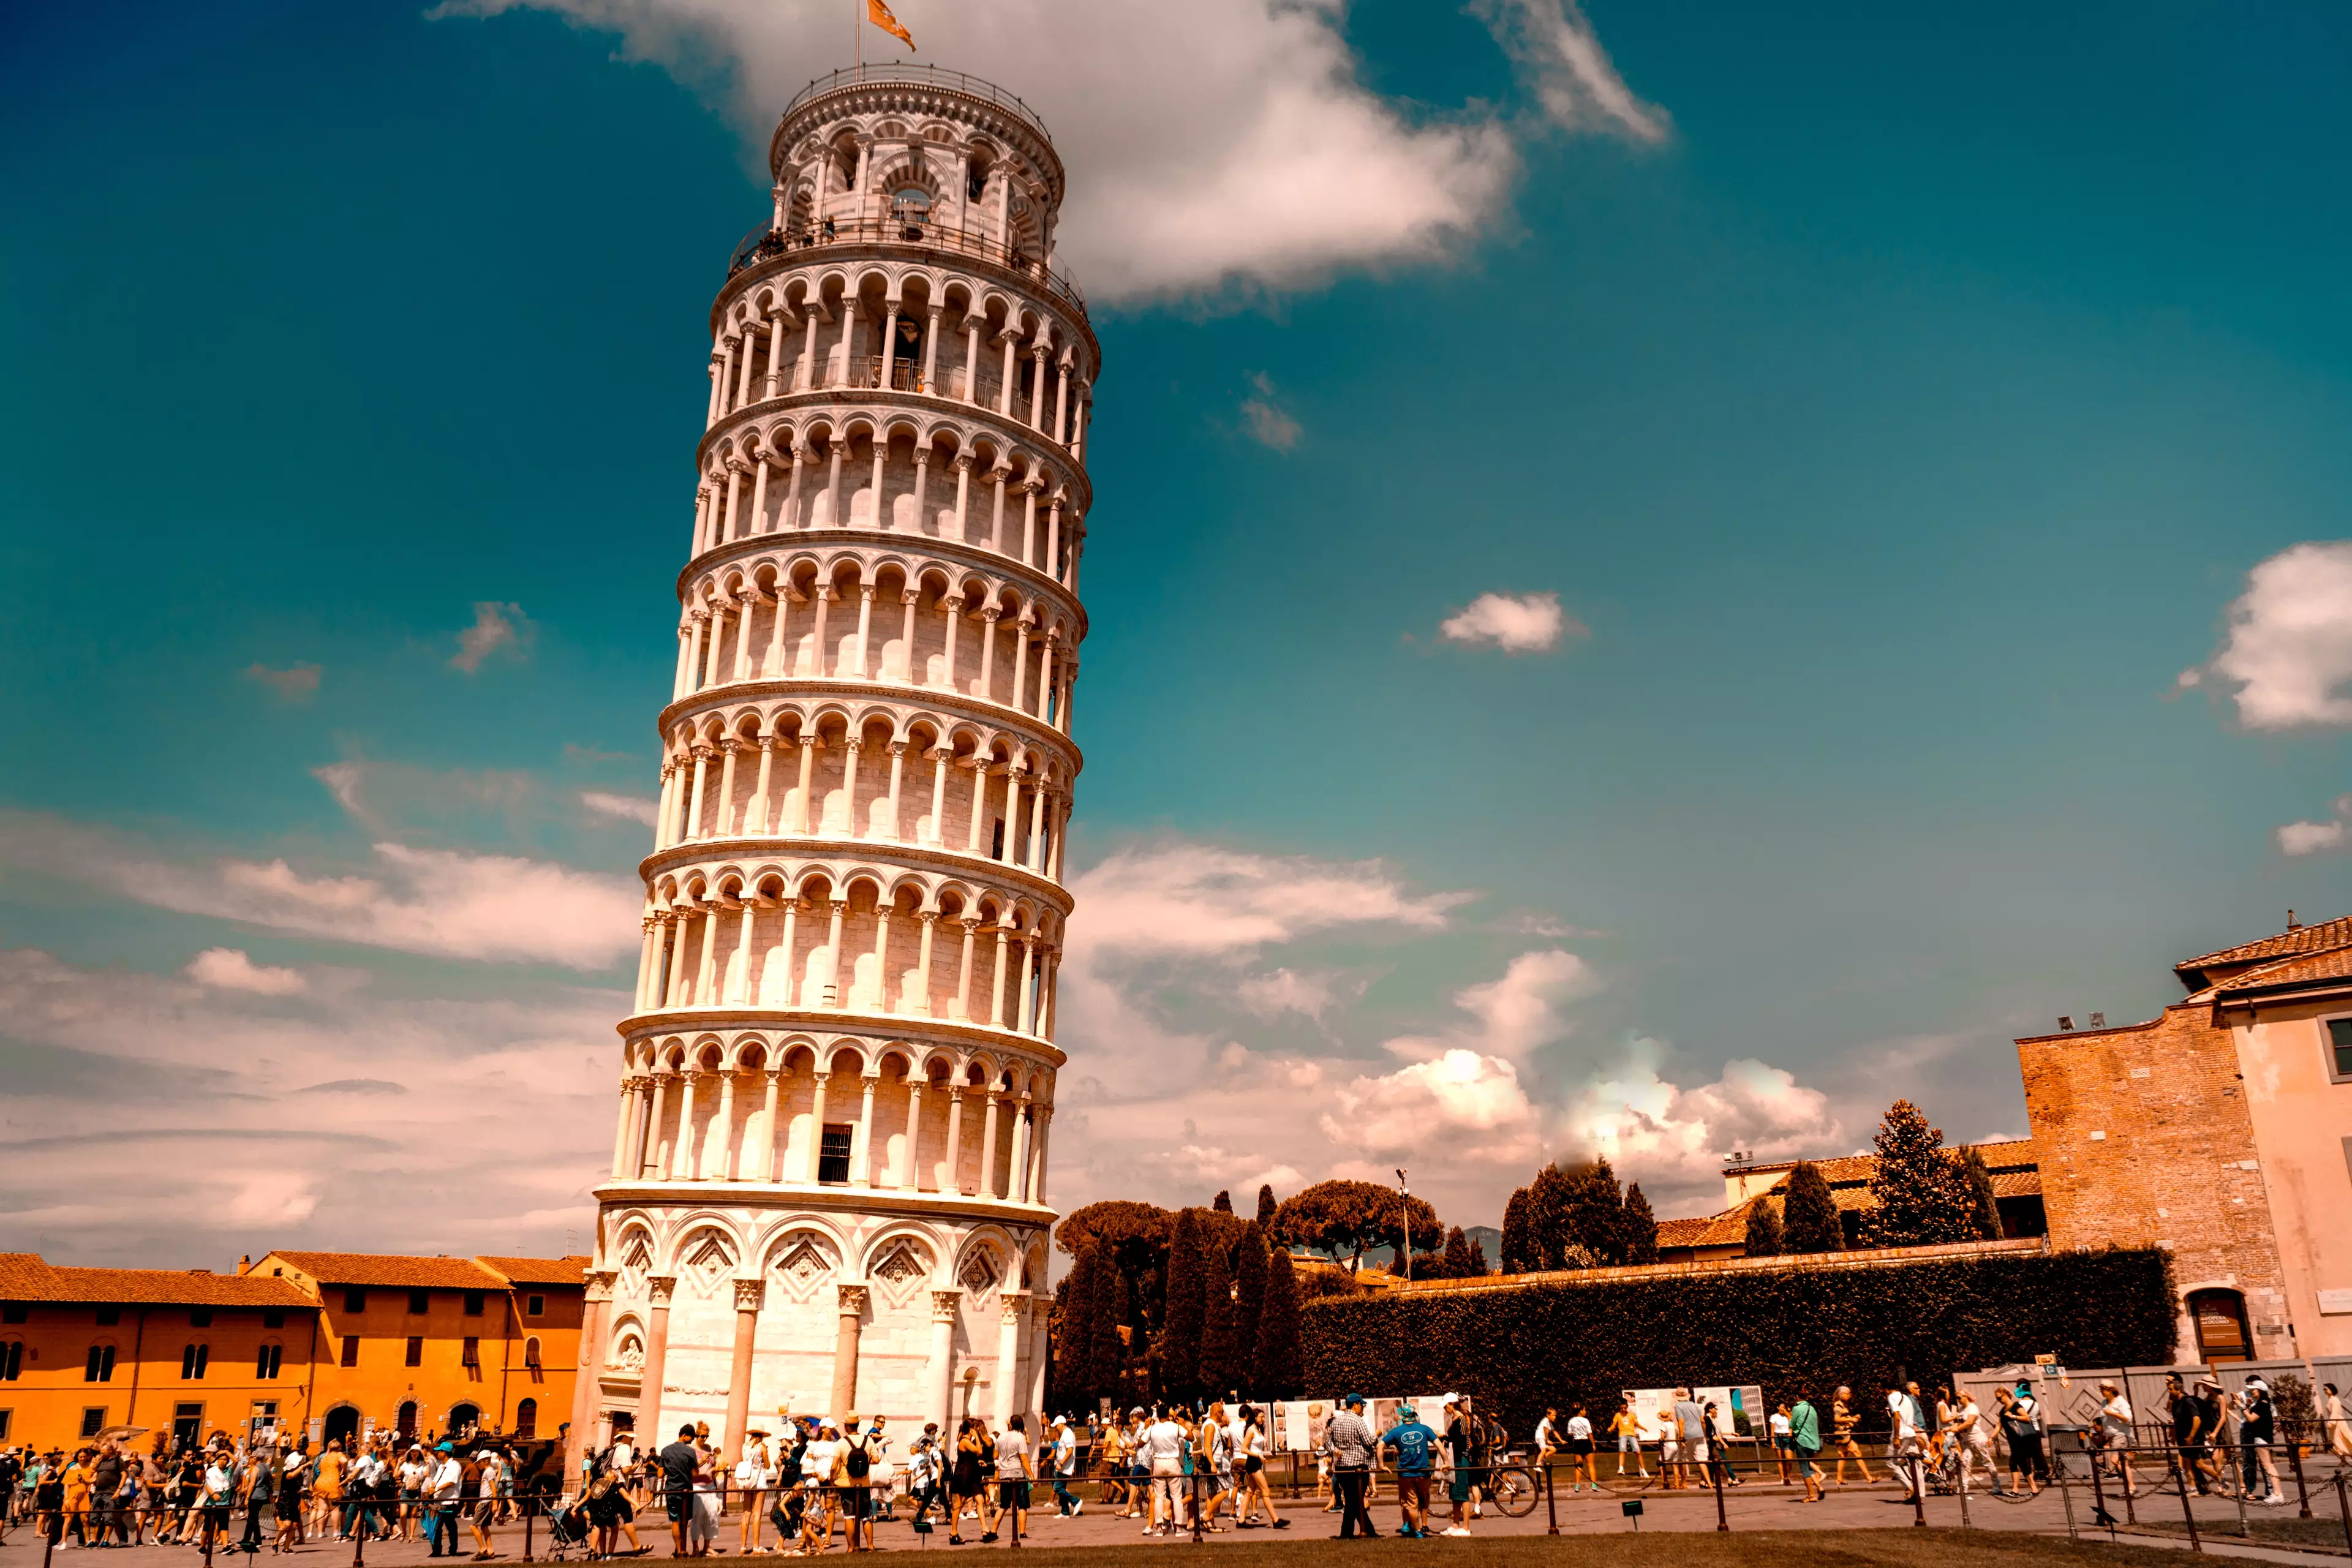 You can fly to Pisa for £13.99 one way (